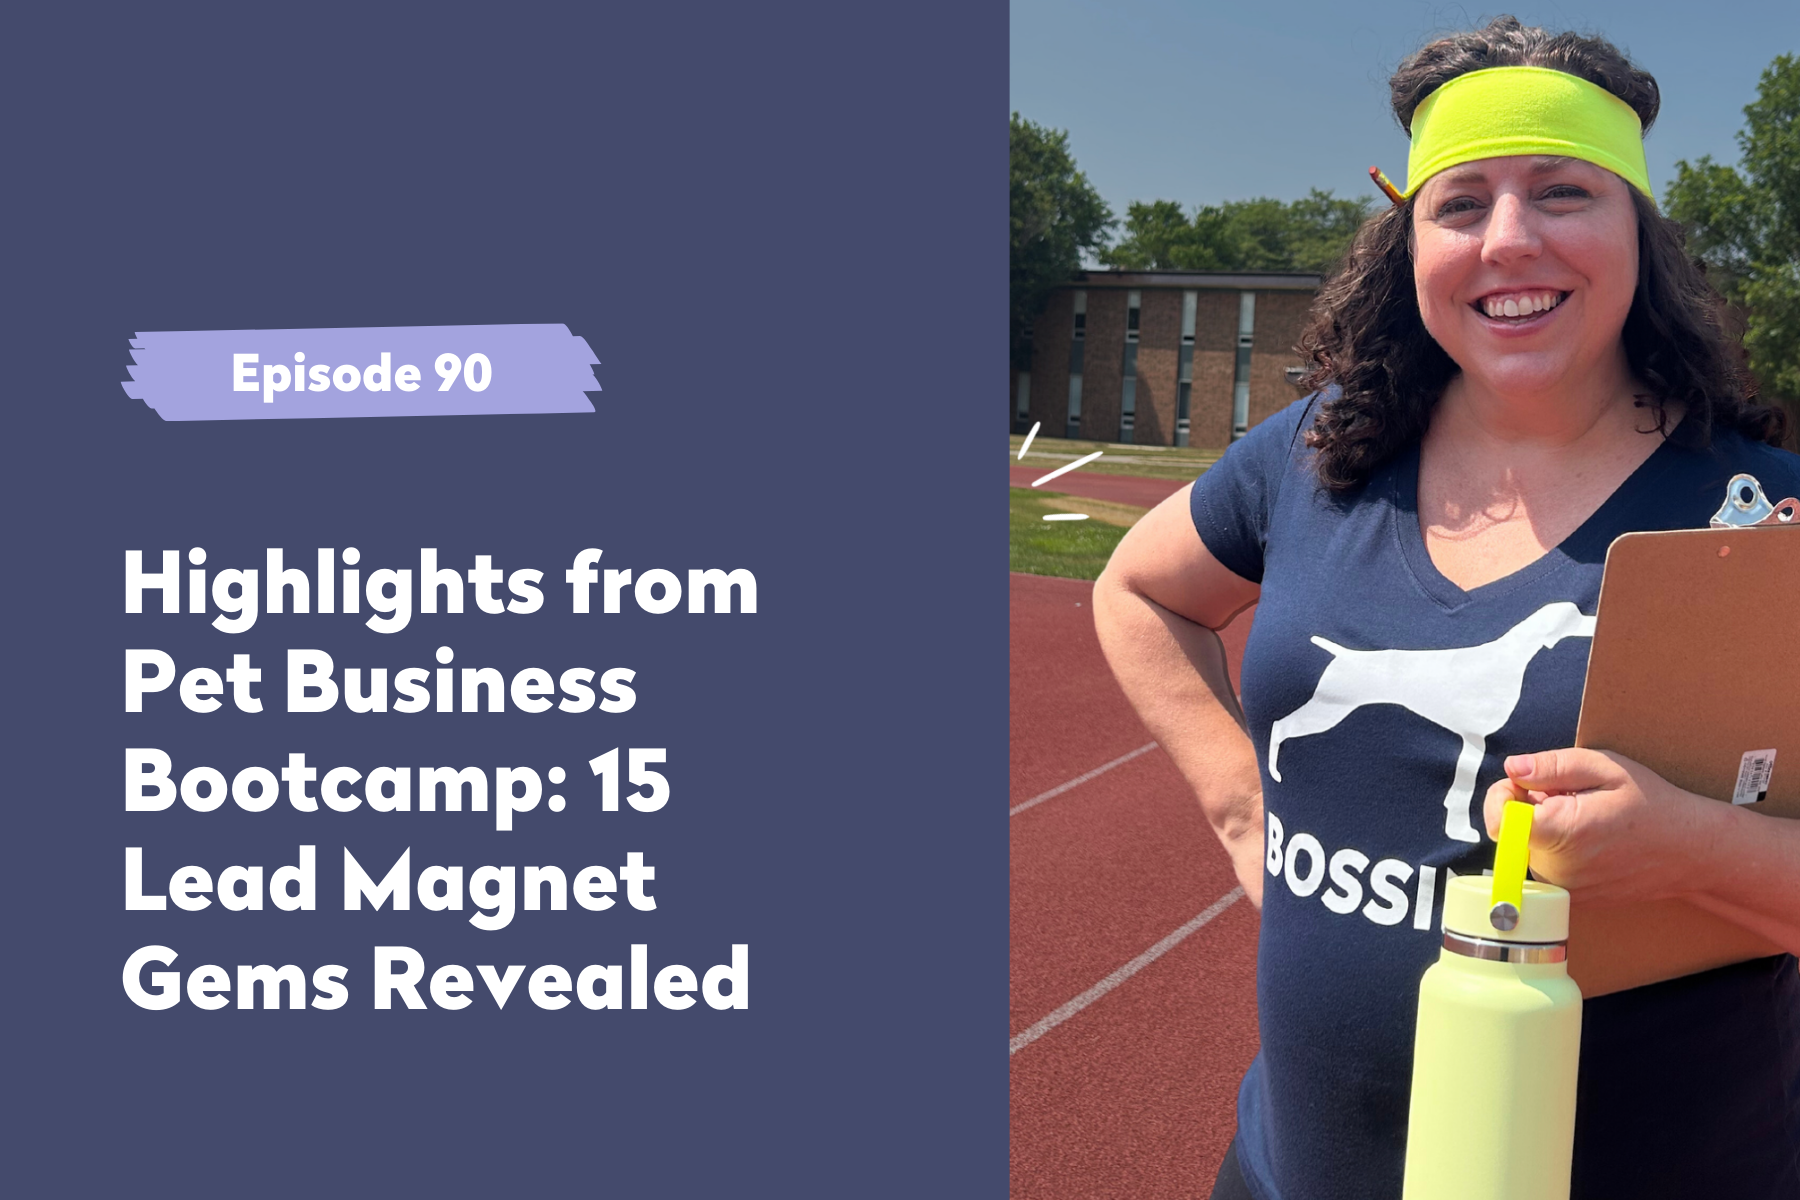 Episode 90 | Highlights from Pet Business Bootcamp: 15 Lead Magnet Gems Revealed